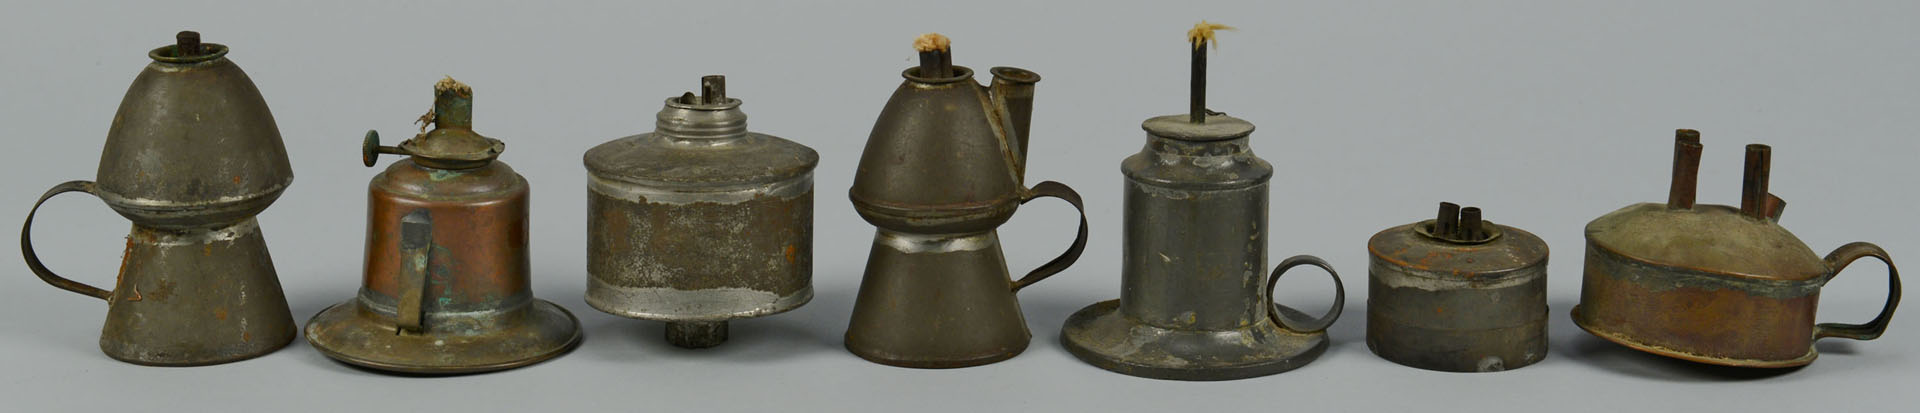 Lot 287: Large grouping of tin lighting related items